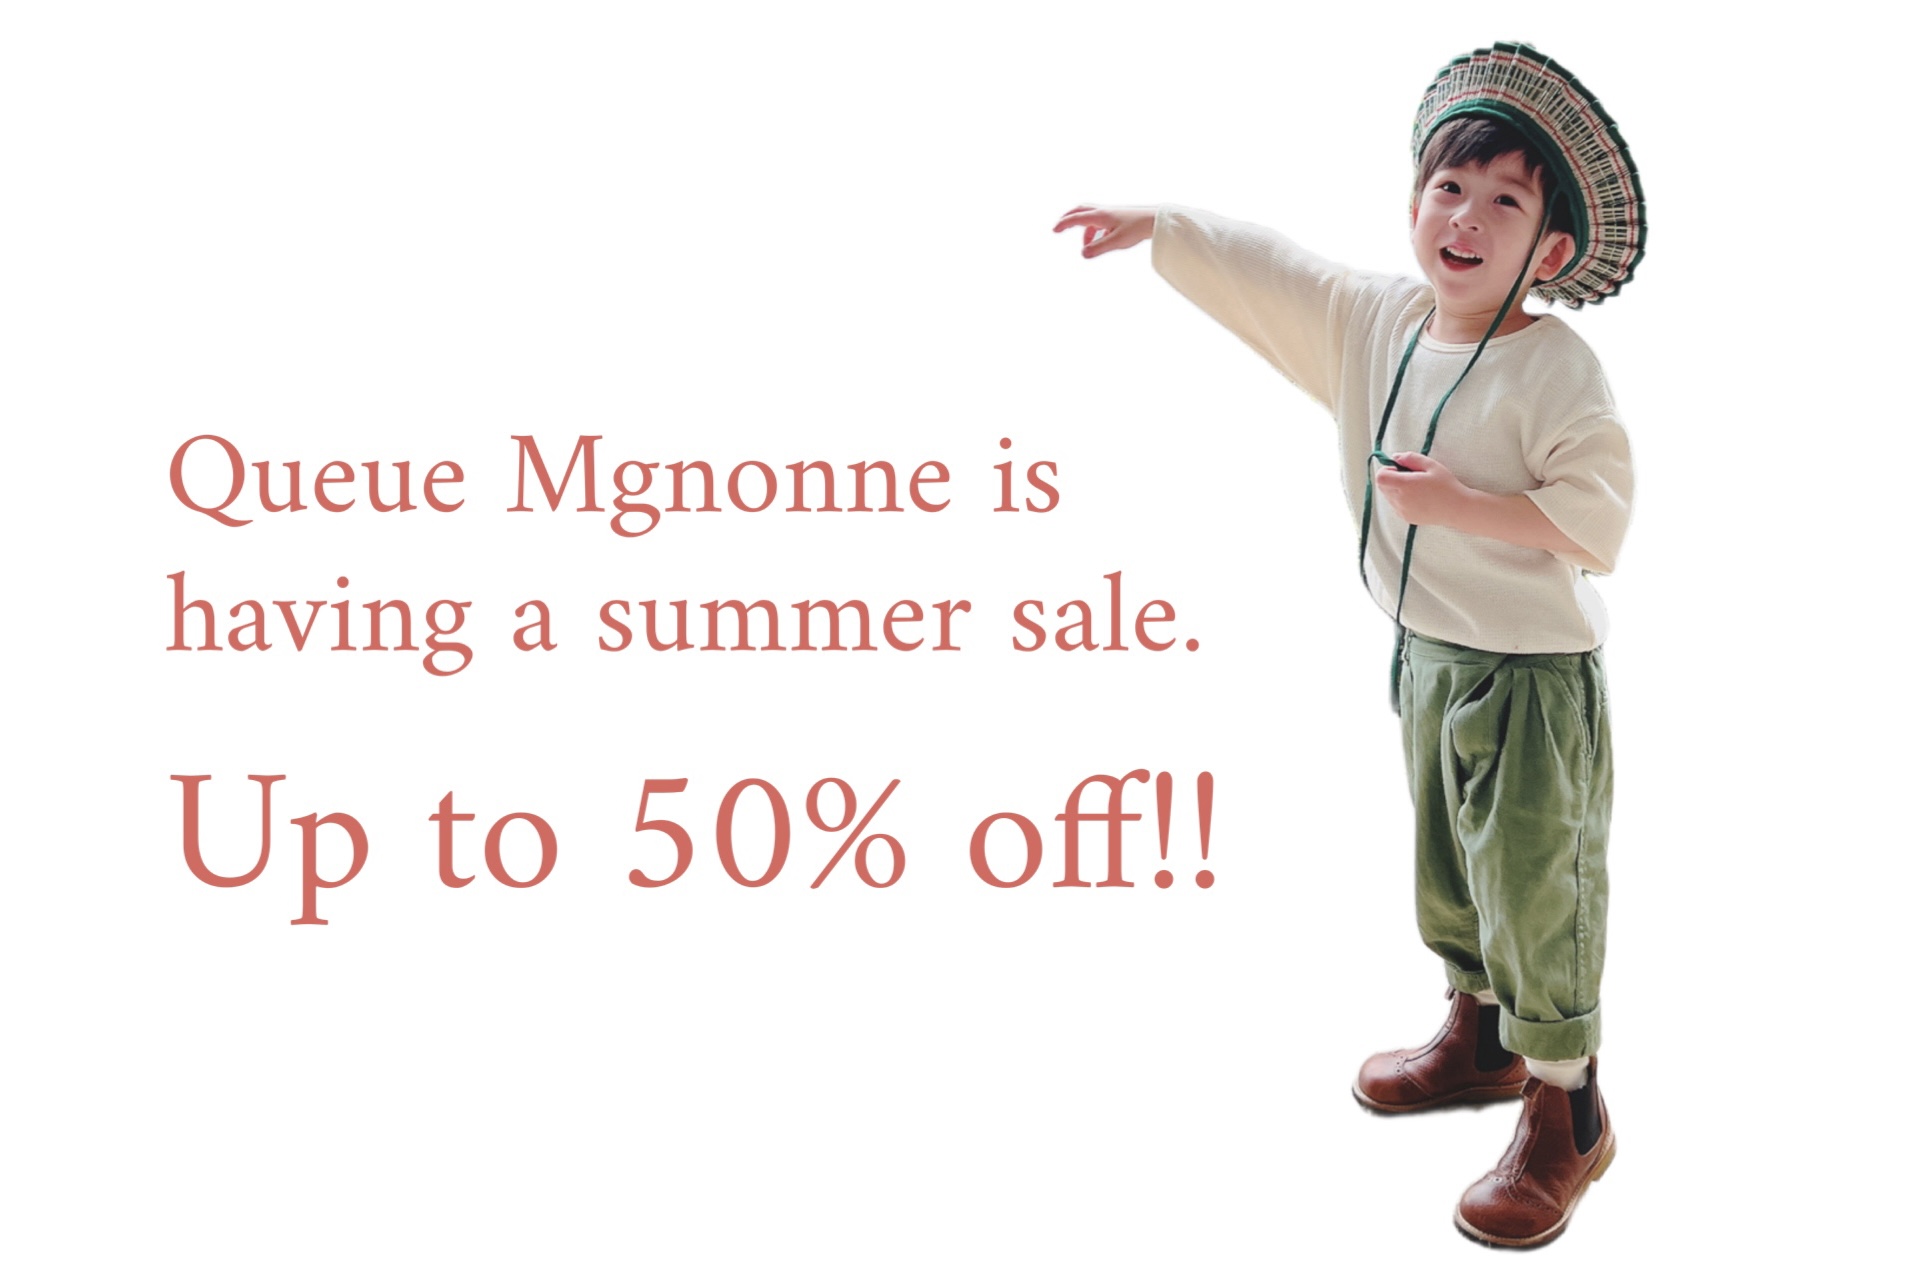 Have a summer sale!! Up to 50% off!!